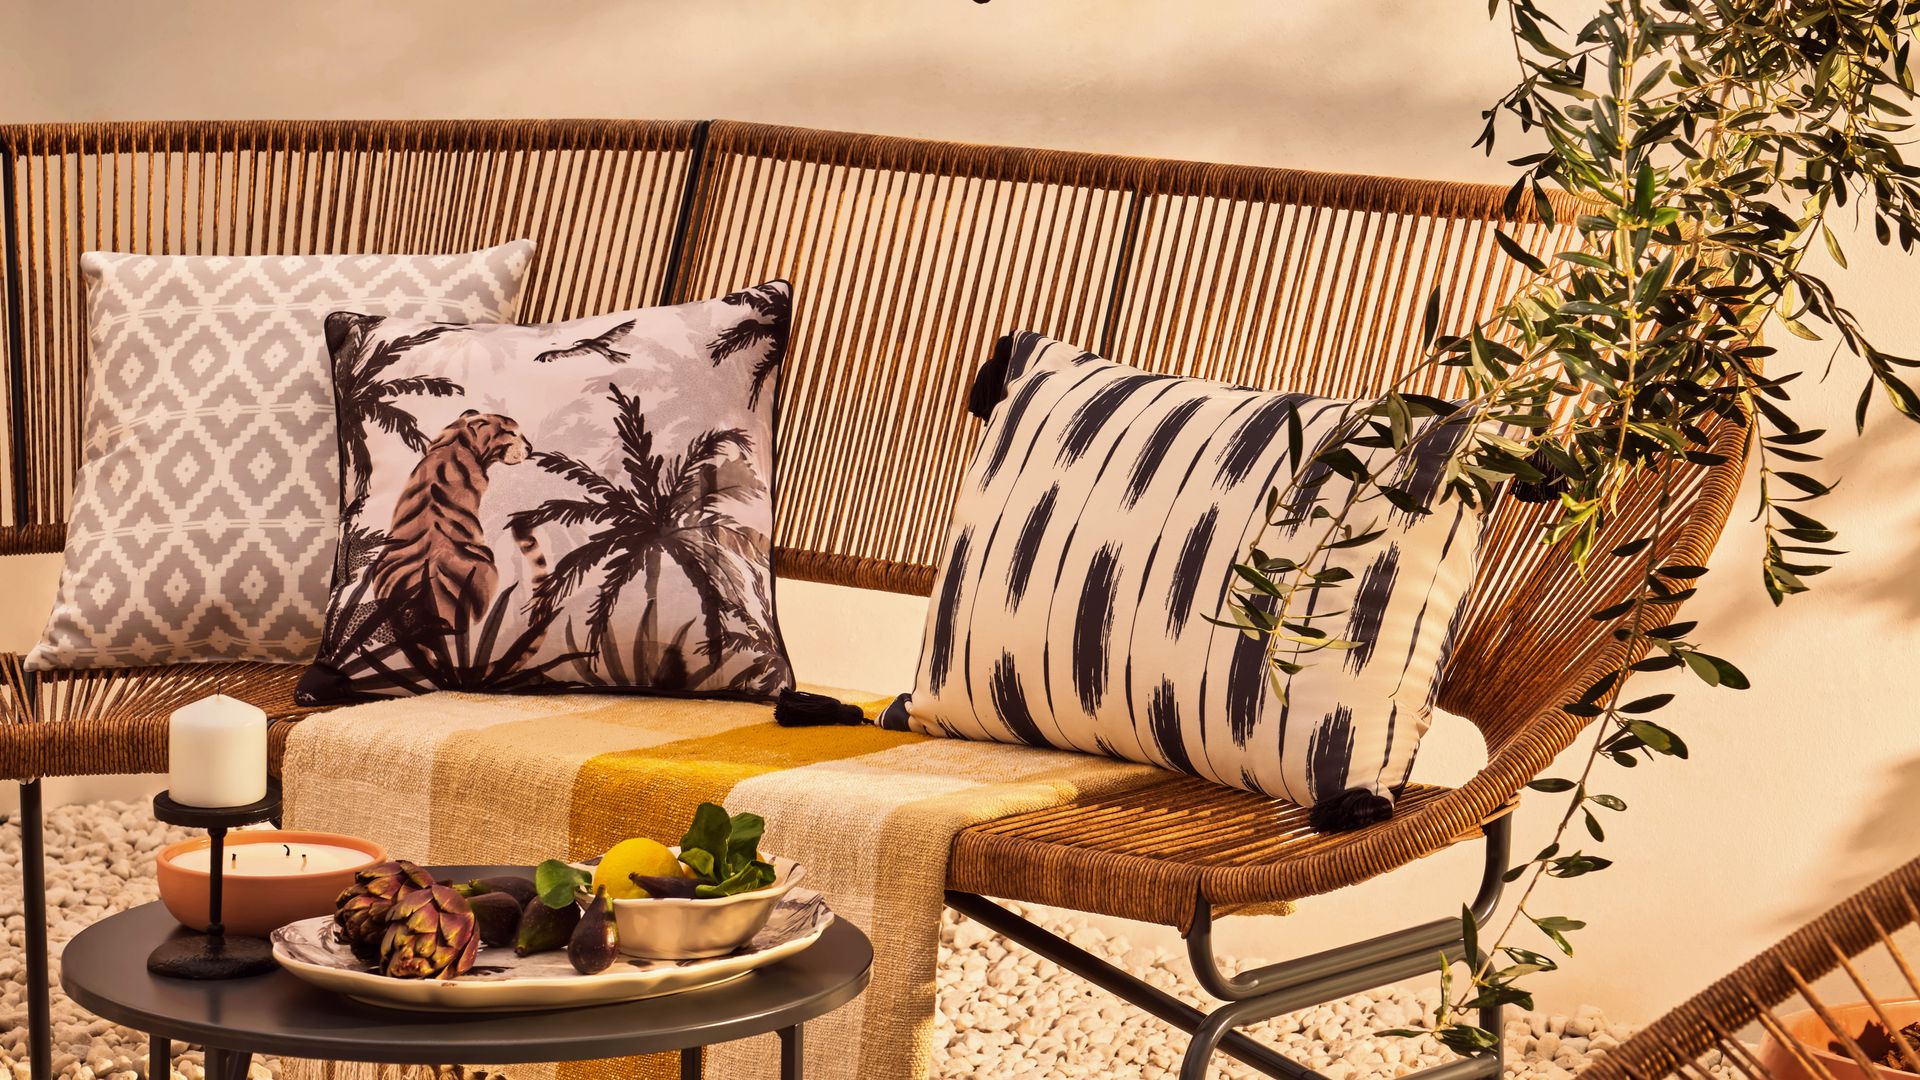 M&S Outdoor Cushions